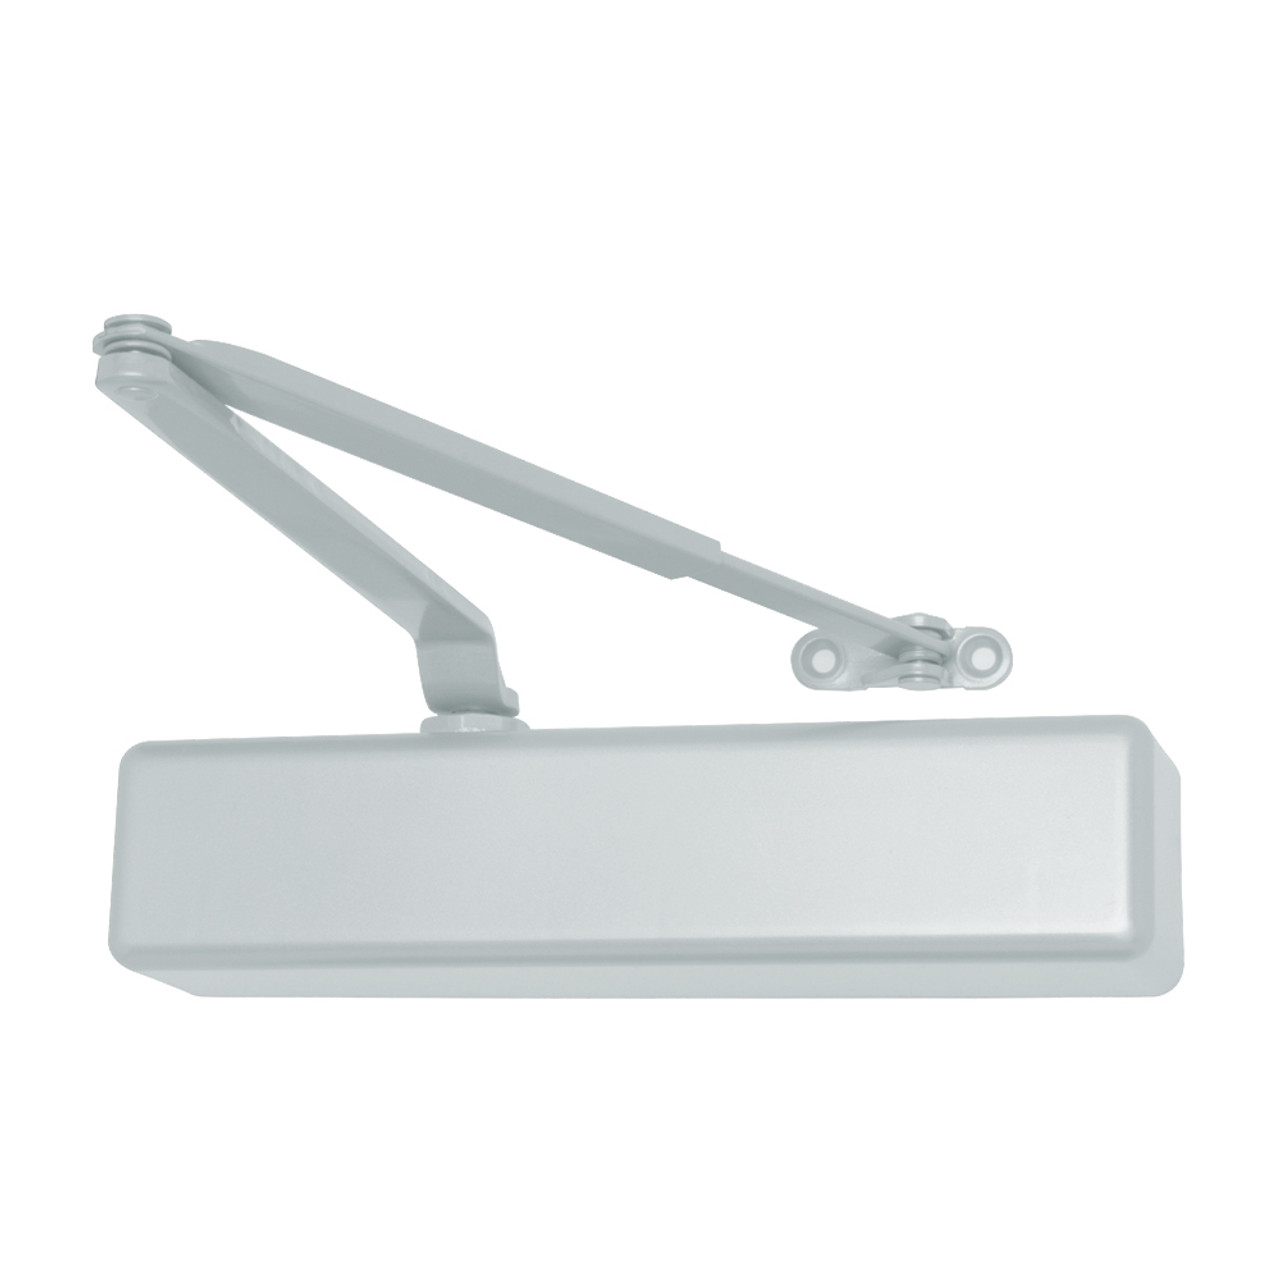 1461-HEDA-w-62G-RH-US26 LCN Door Closer with Hold Open Extra Duty Arm with Thick Hub Shoe in Bright Chrome Finish